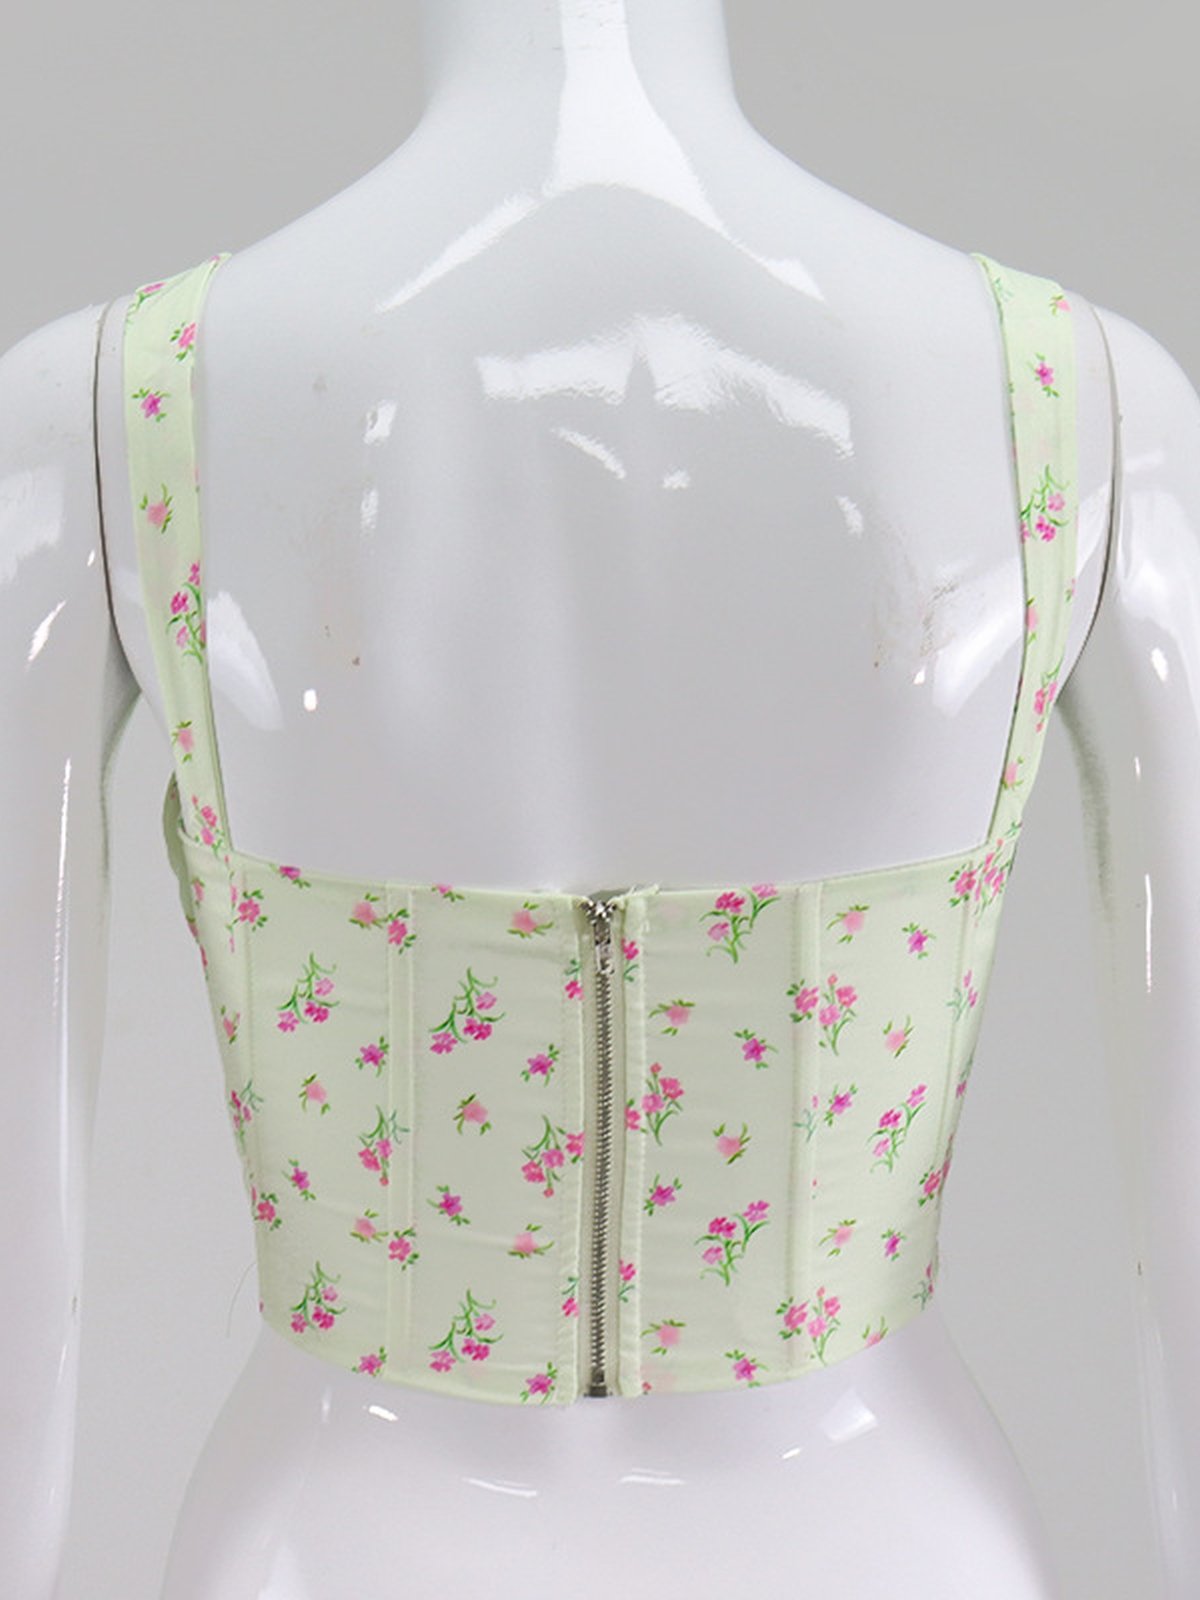 LaPose Fashion - Luna Floral Corset Top - Clothing, Corset Tops, Crop Tops, Influence, Tops